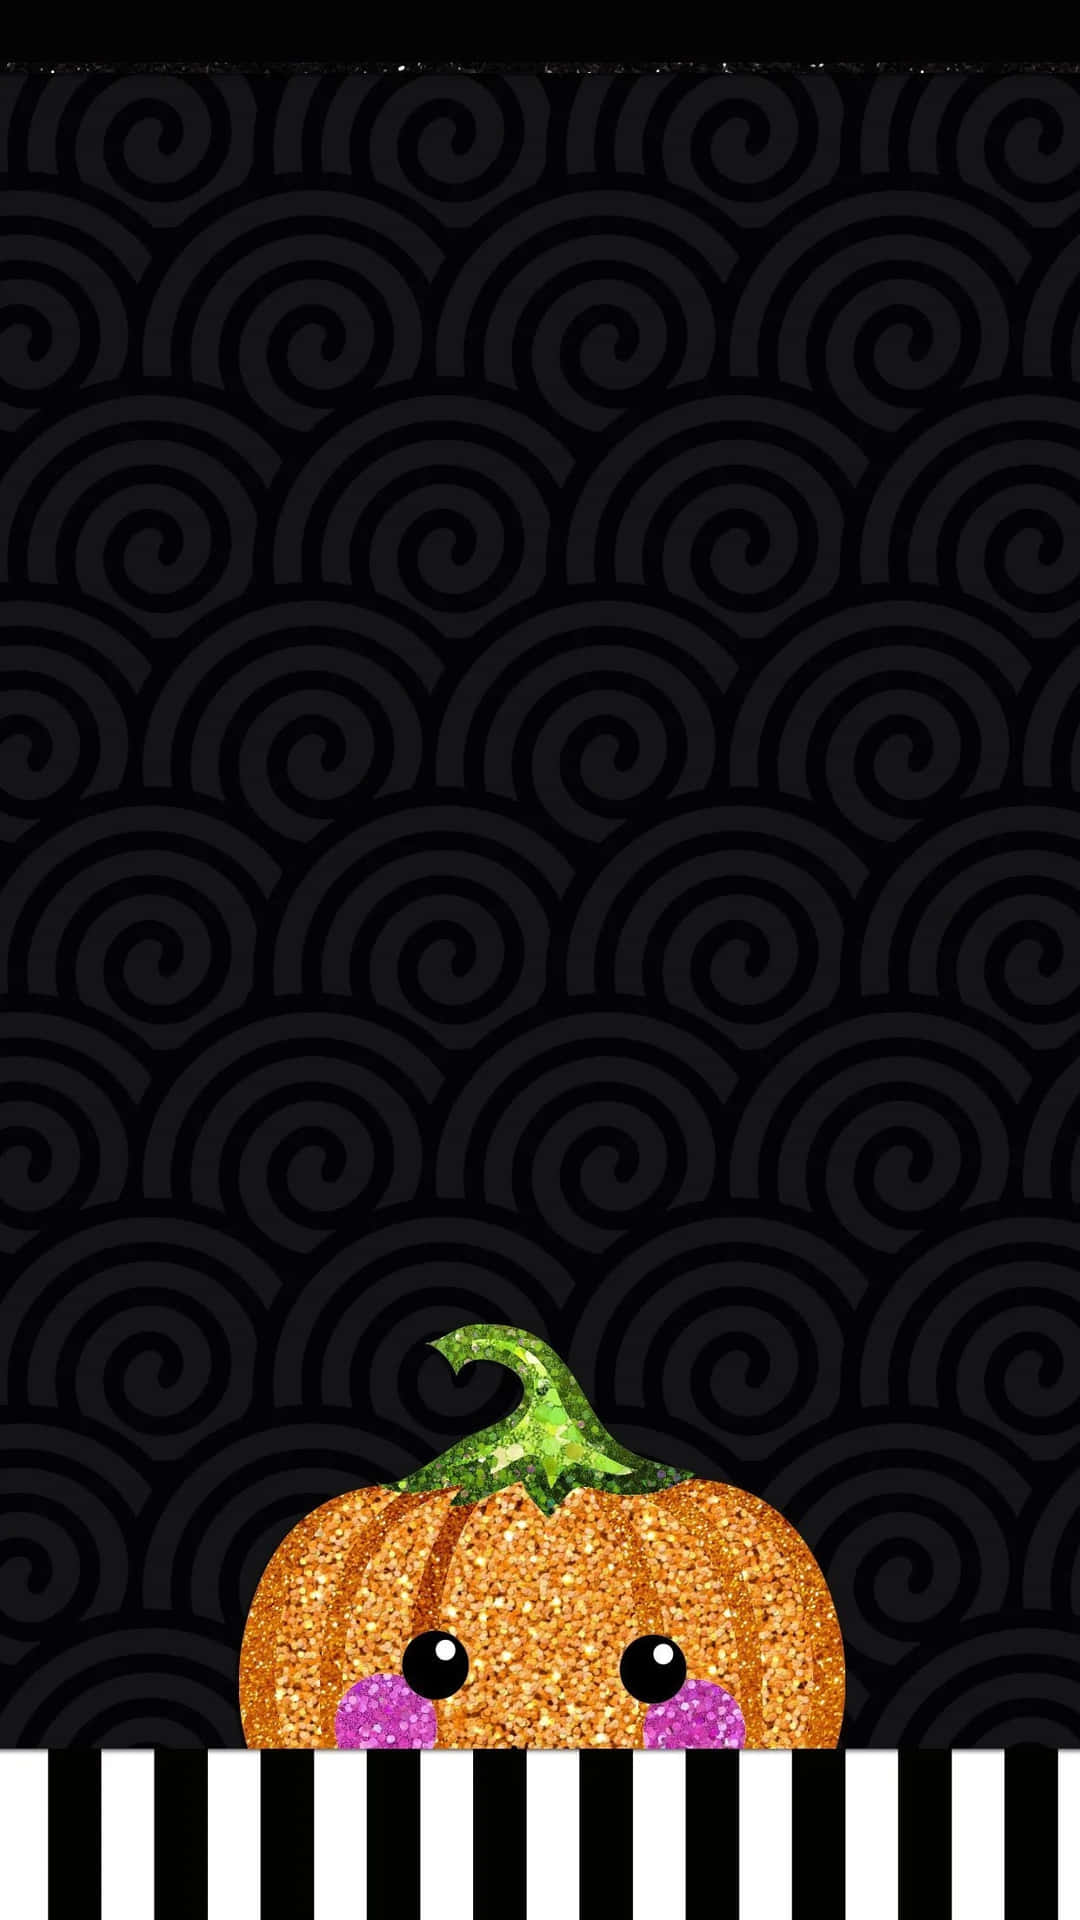 Get in the spooky spirit this Halloween and dress your phone up with this whimsical wallpaper!